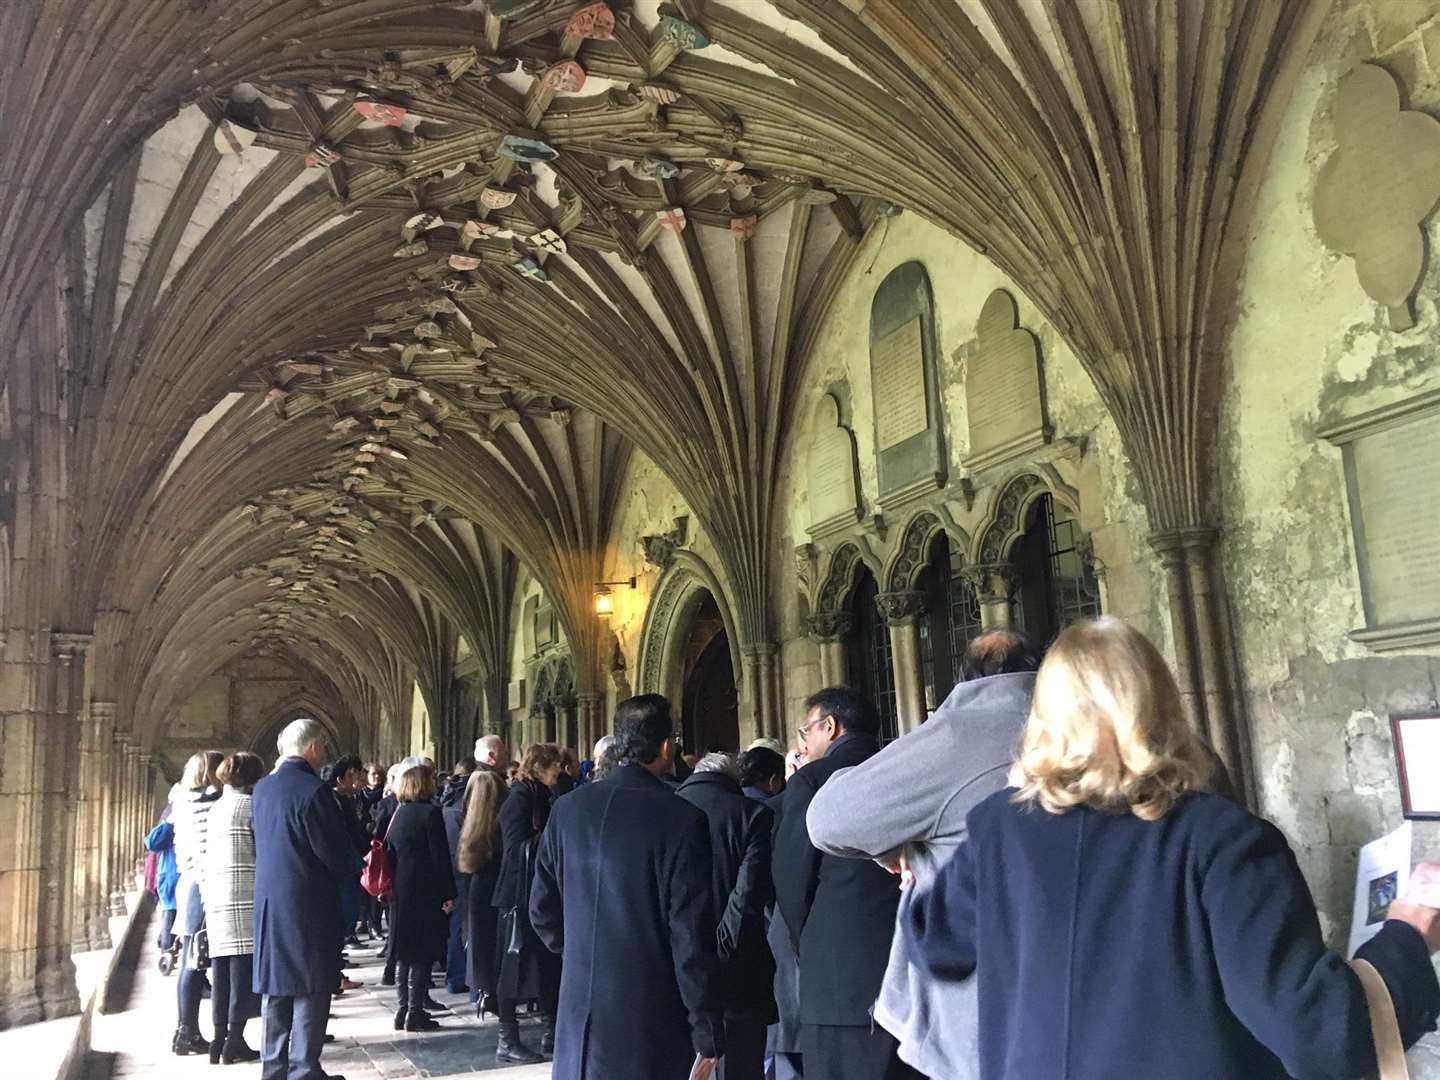 Crowds gather at Canterbury Cathedral following Dr Kanagasooriam's funeral.